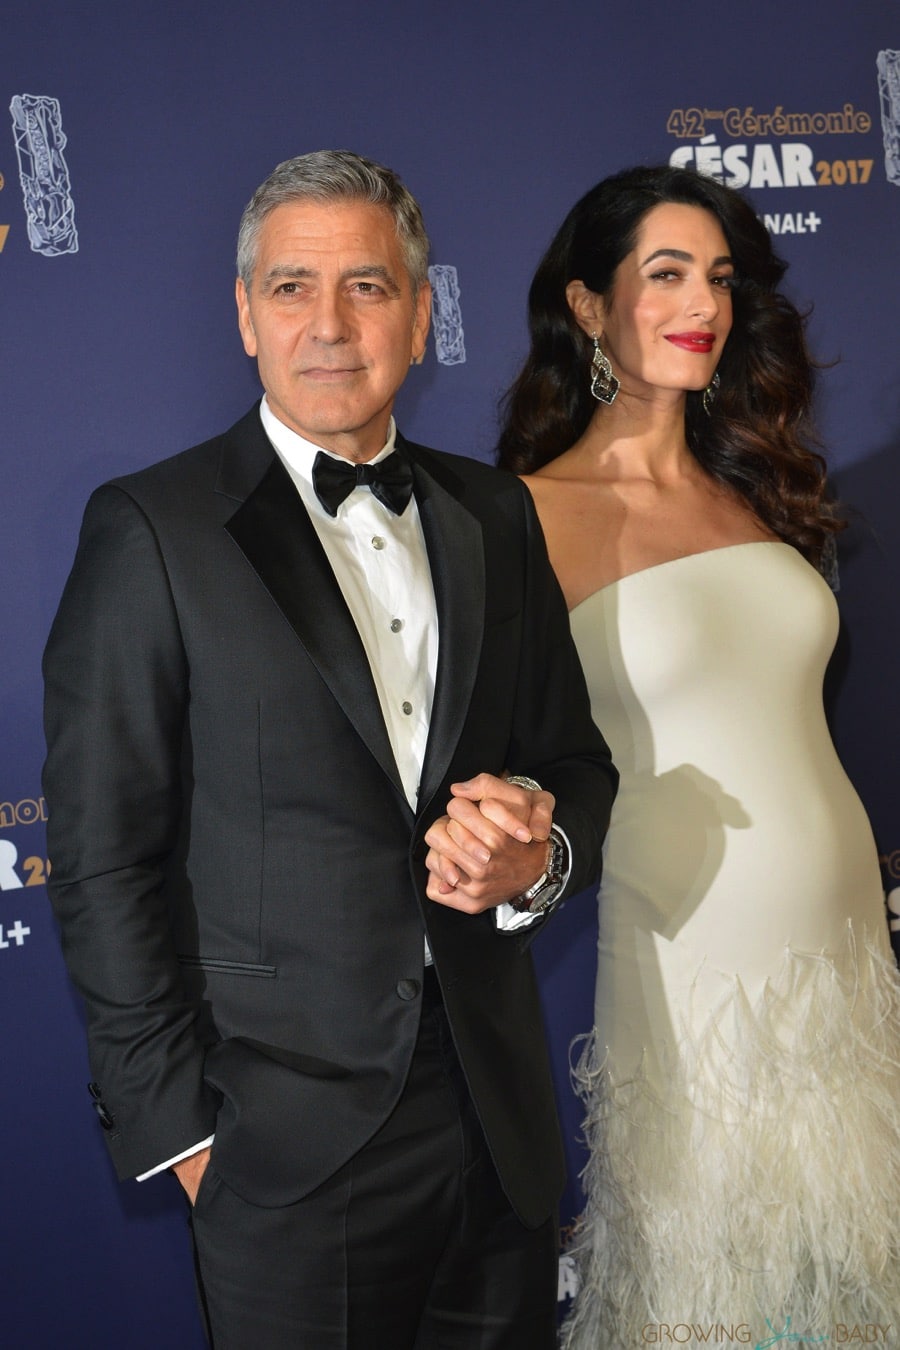 George Clooney and a pregnant Amal Clooney attend the photocall for Caesar's Film awards looking elegant together.